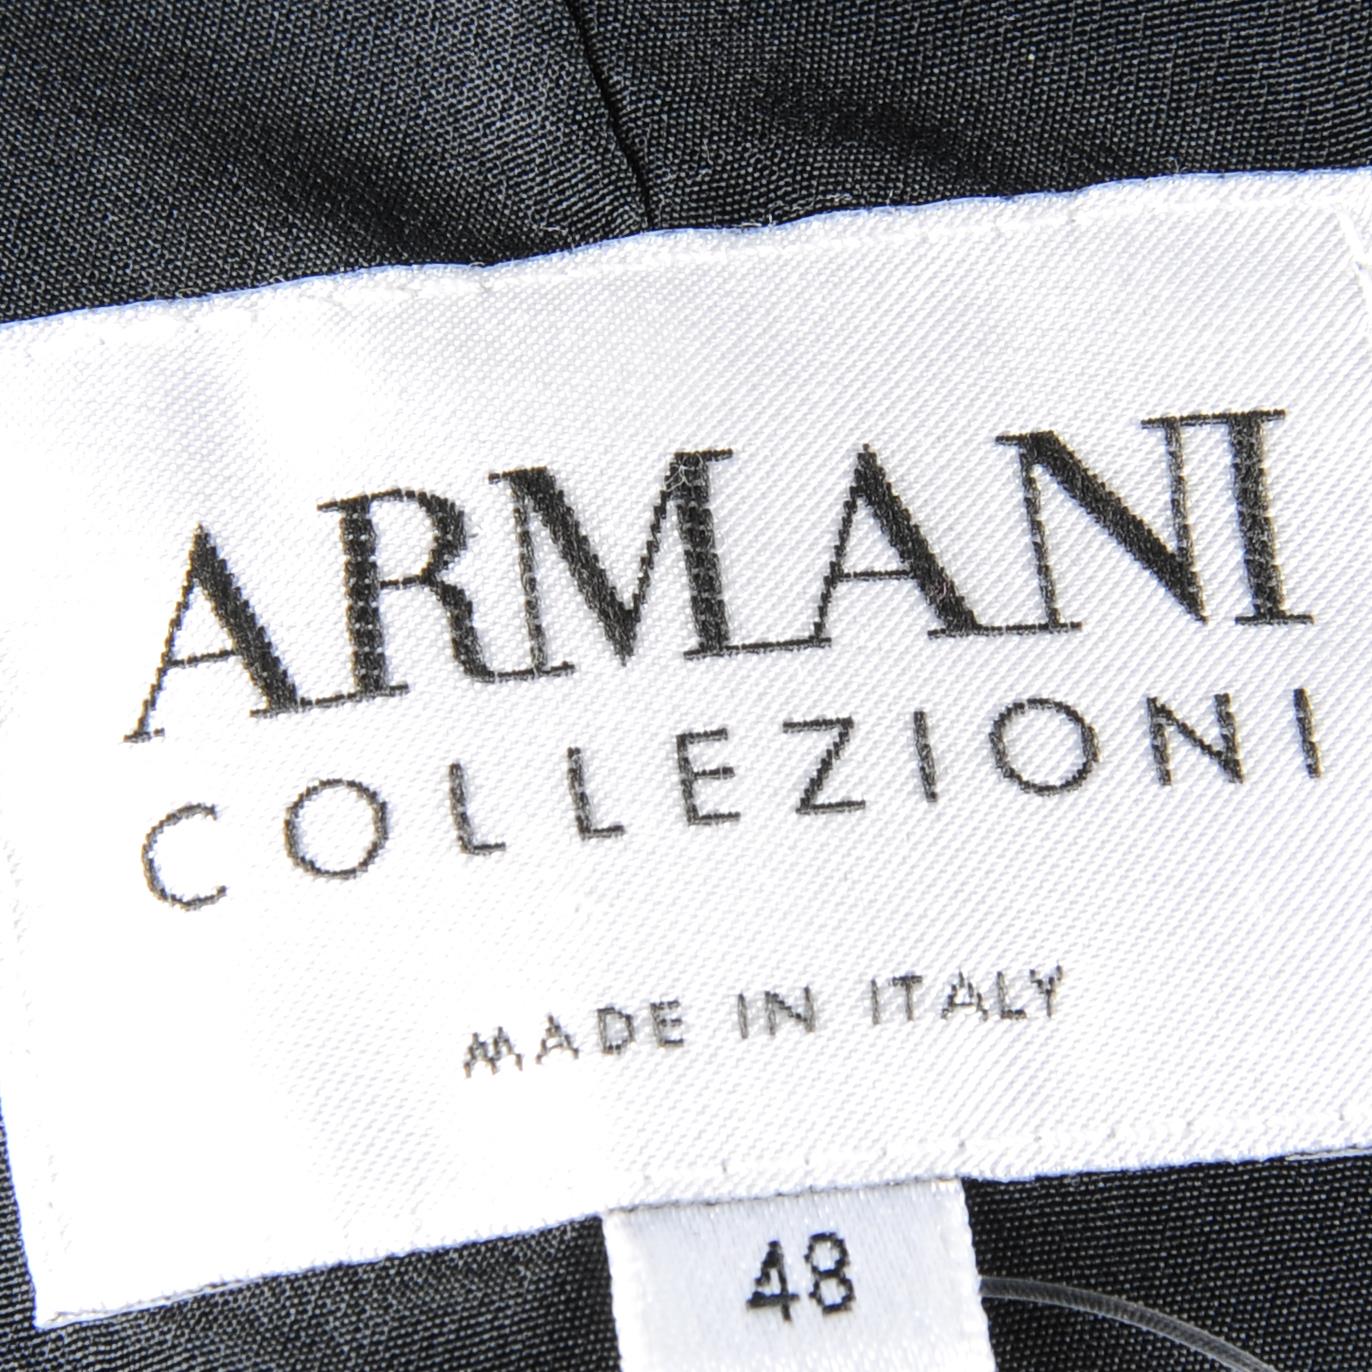 ARMANI COLLEZIONI - a jacket and pencil skirt. - Image 3 of 3